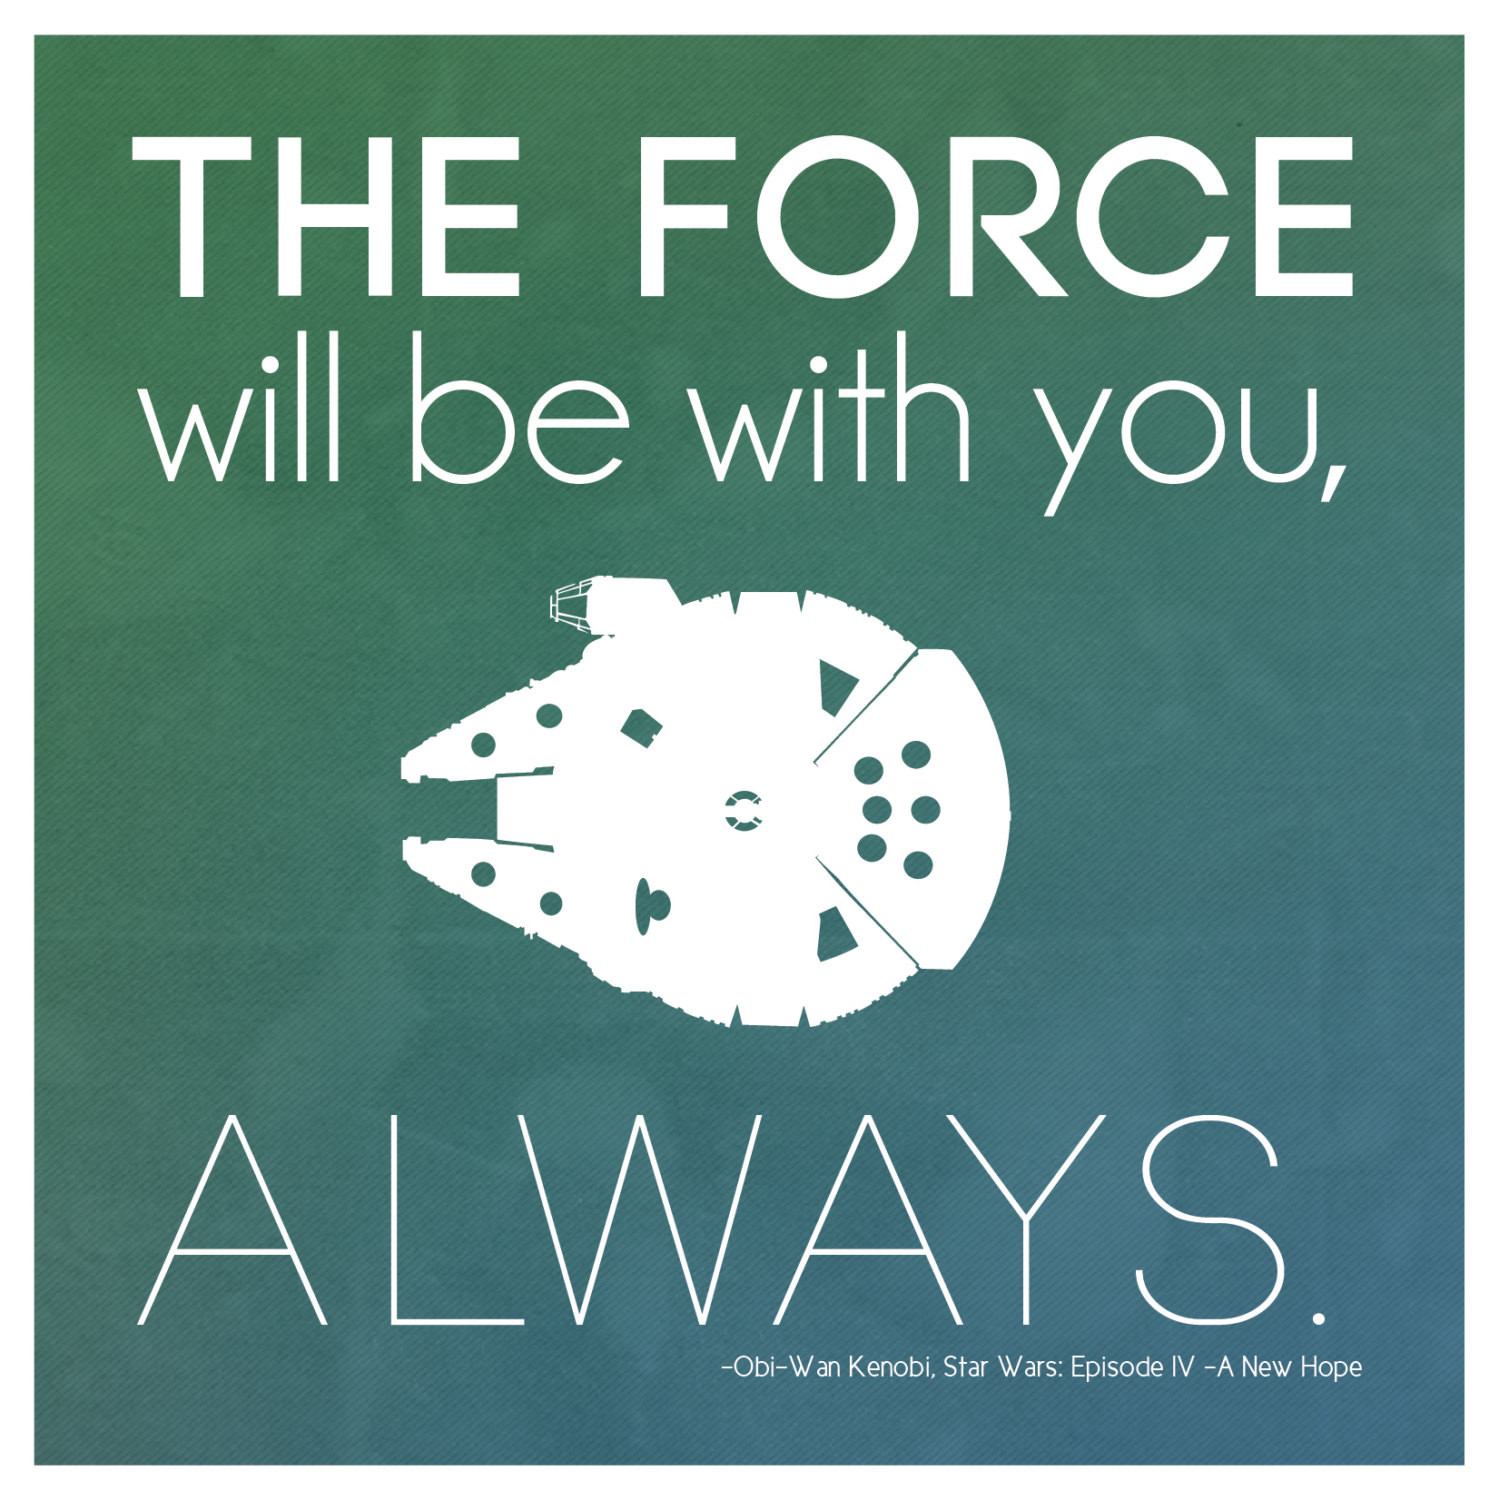 Star Wars Graduation Quotes
 Quotes and thoughts for the day Page 660